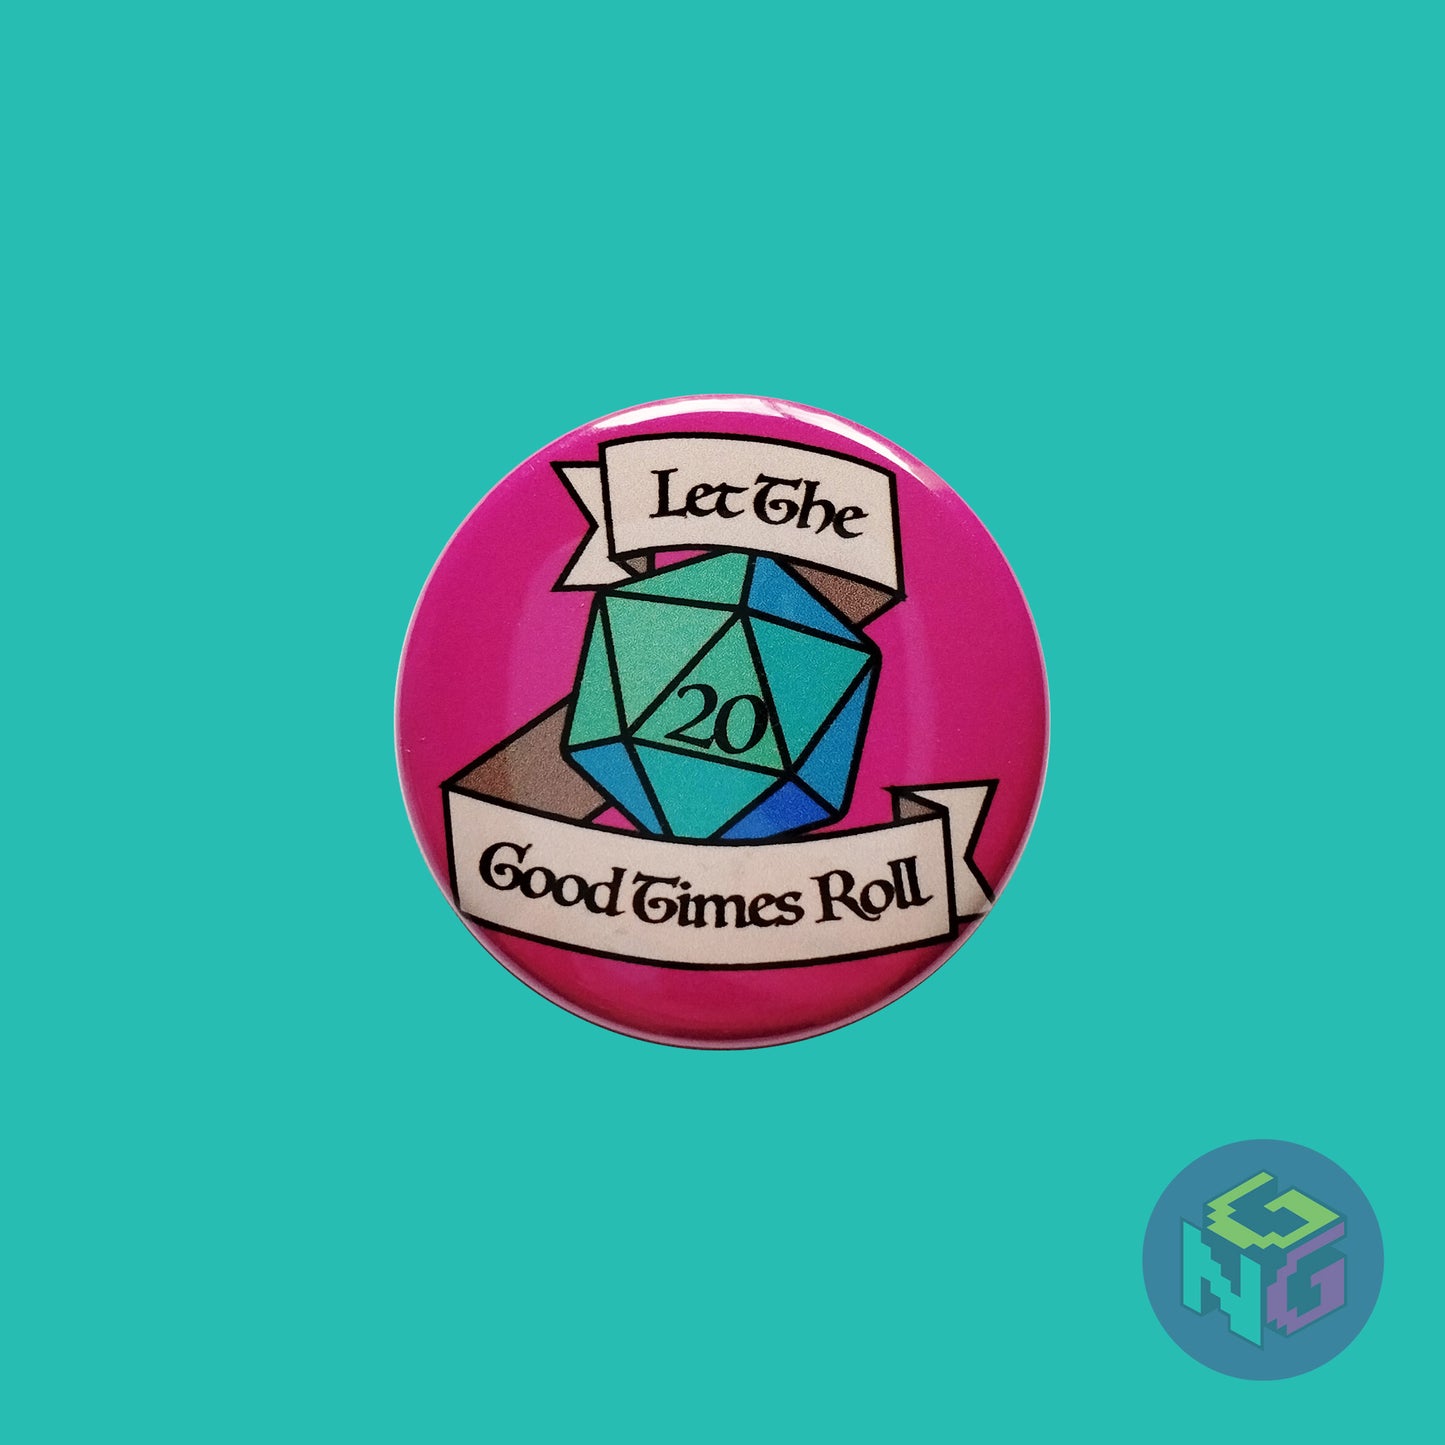 let the good times roll d20 button on mint green background